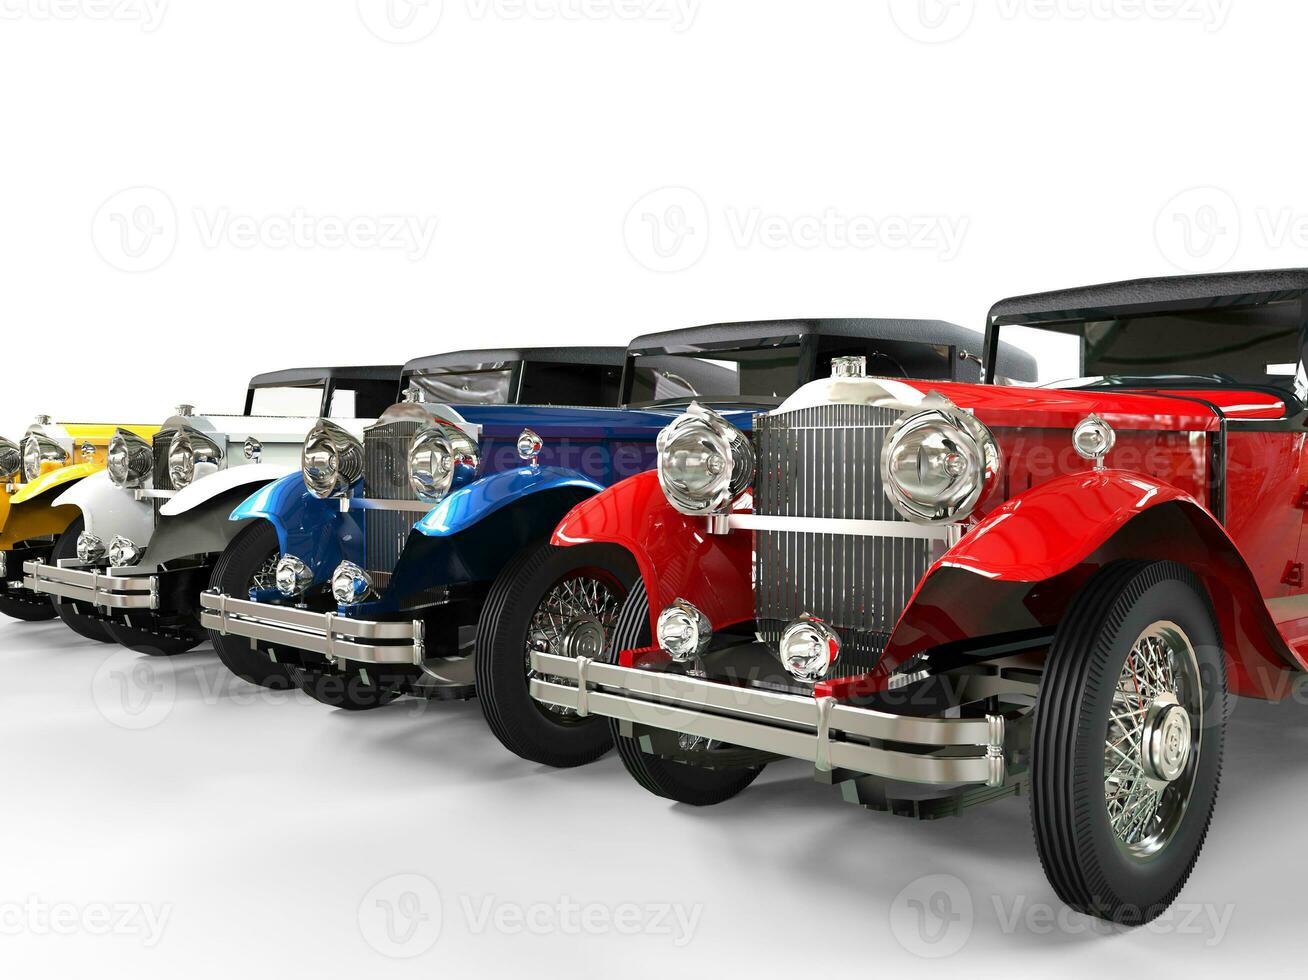 Row of colorful vintage cars photo